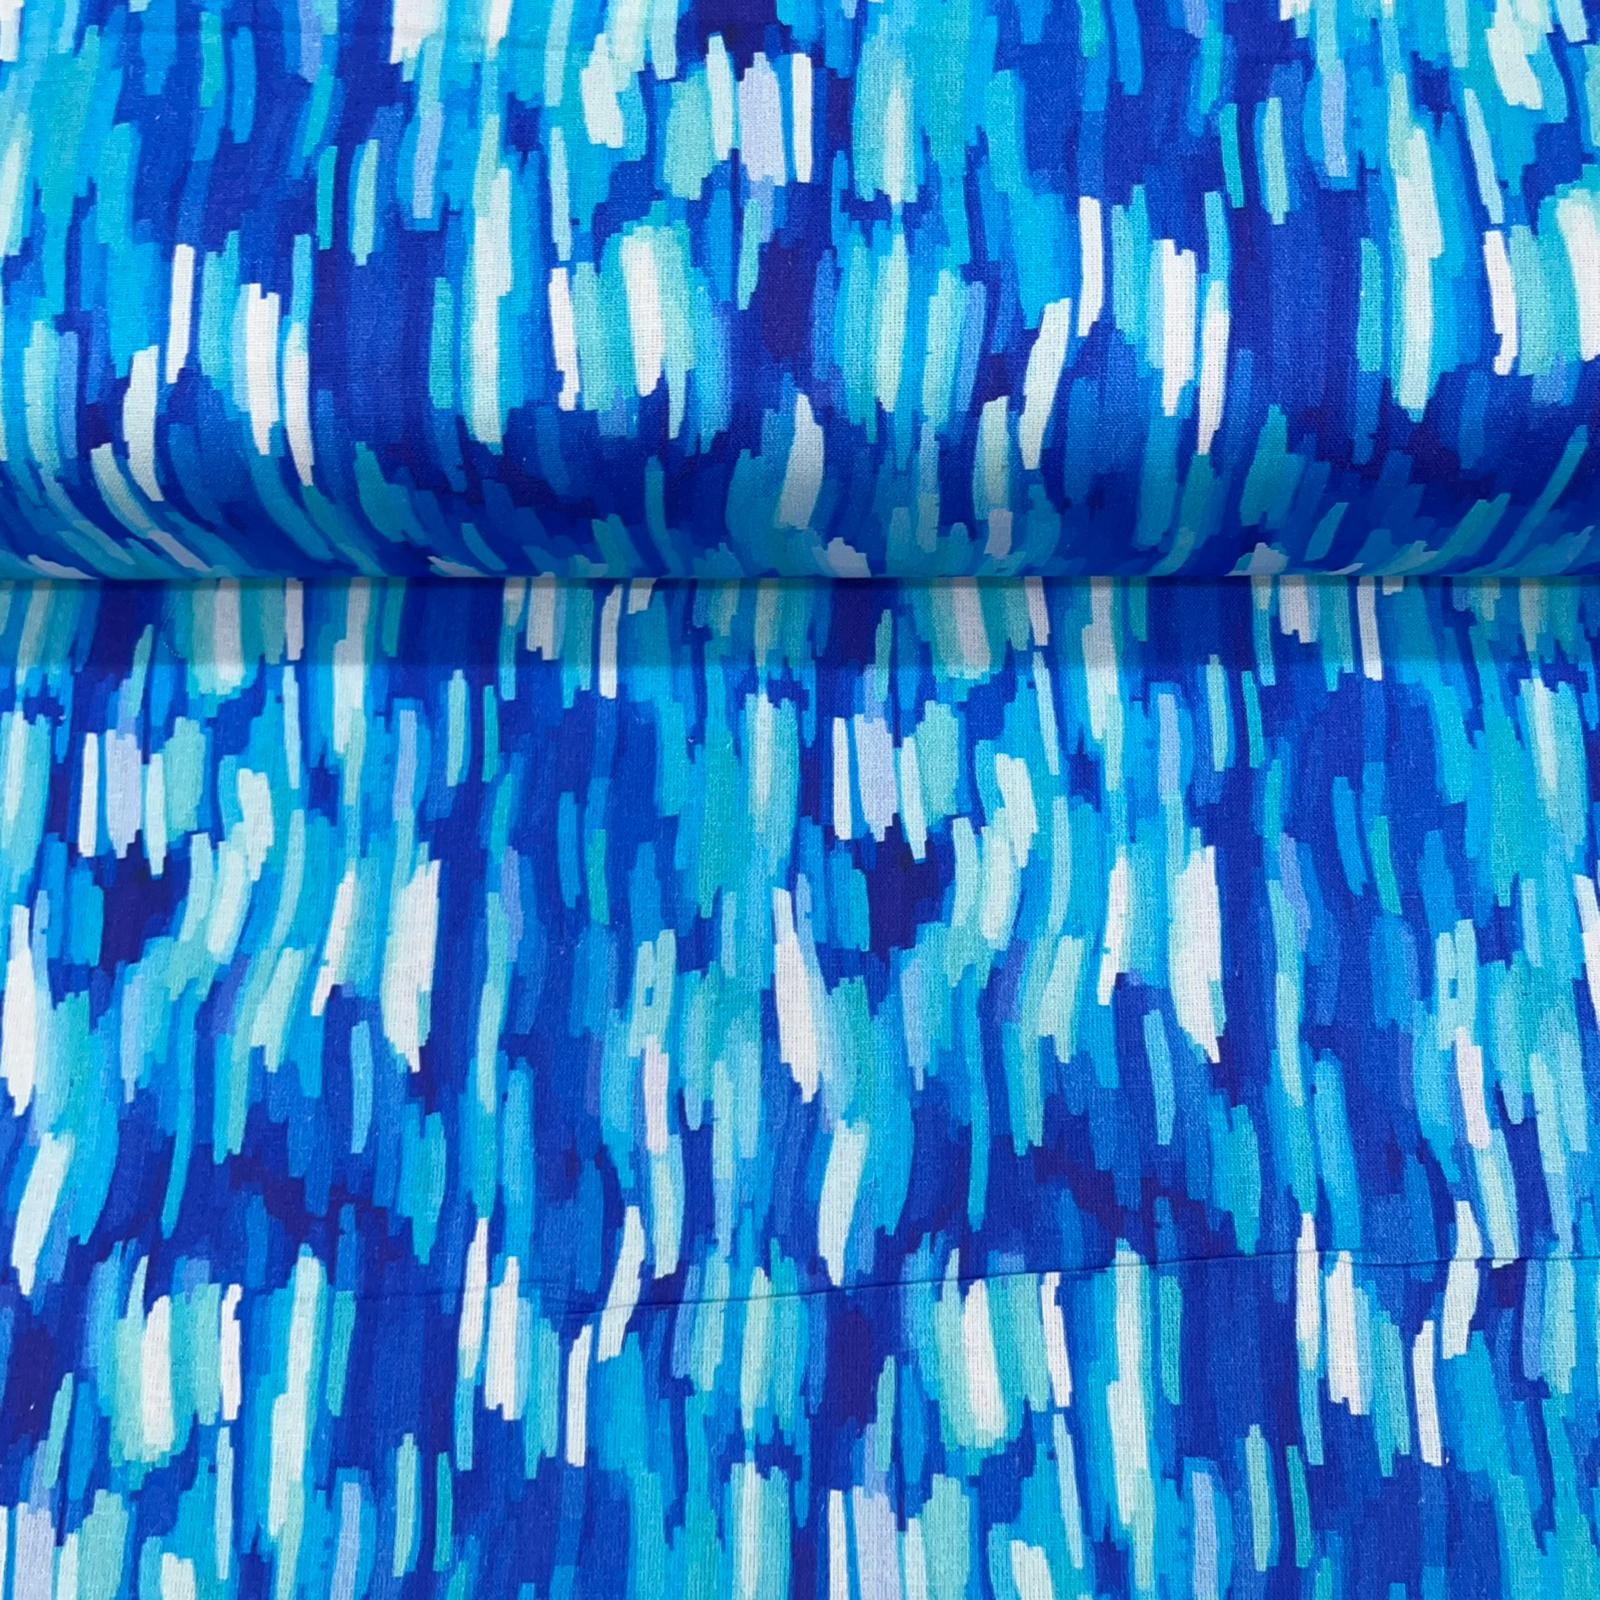 Digital Print 100% Cotton, Artist Collection, 'Strokes-Ocean Breeze', 44" Wide - Printed Cottons